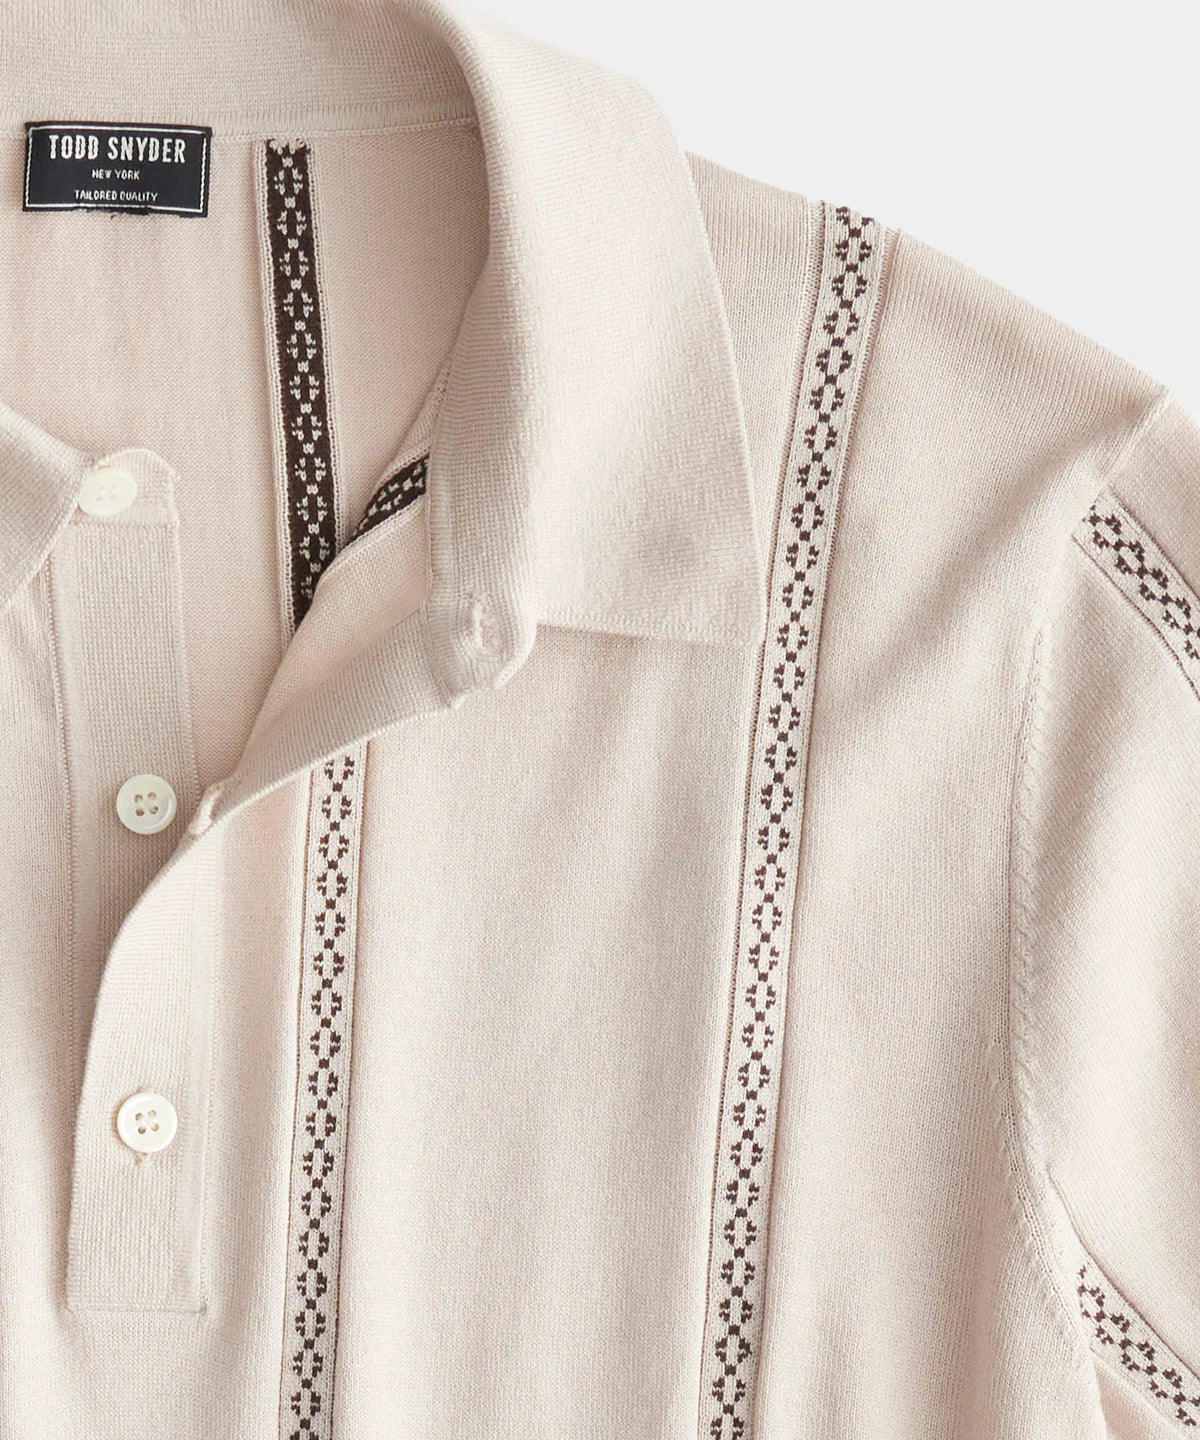 Todd Snyder - TODD SNYDER DECO STRIPE SHORT-SLEEVE SWEATER POLO IN DESERT BEIGE - Rent With Thred